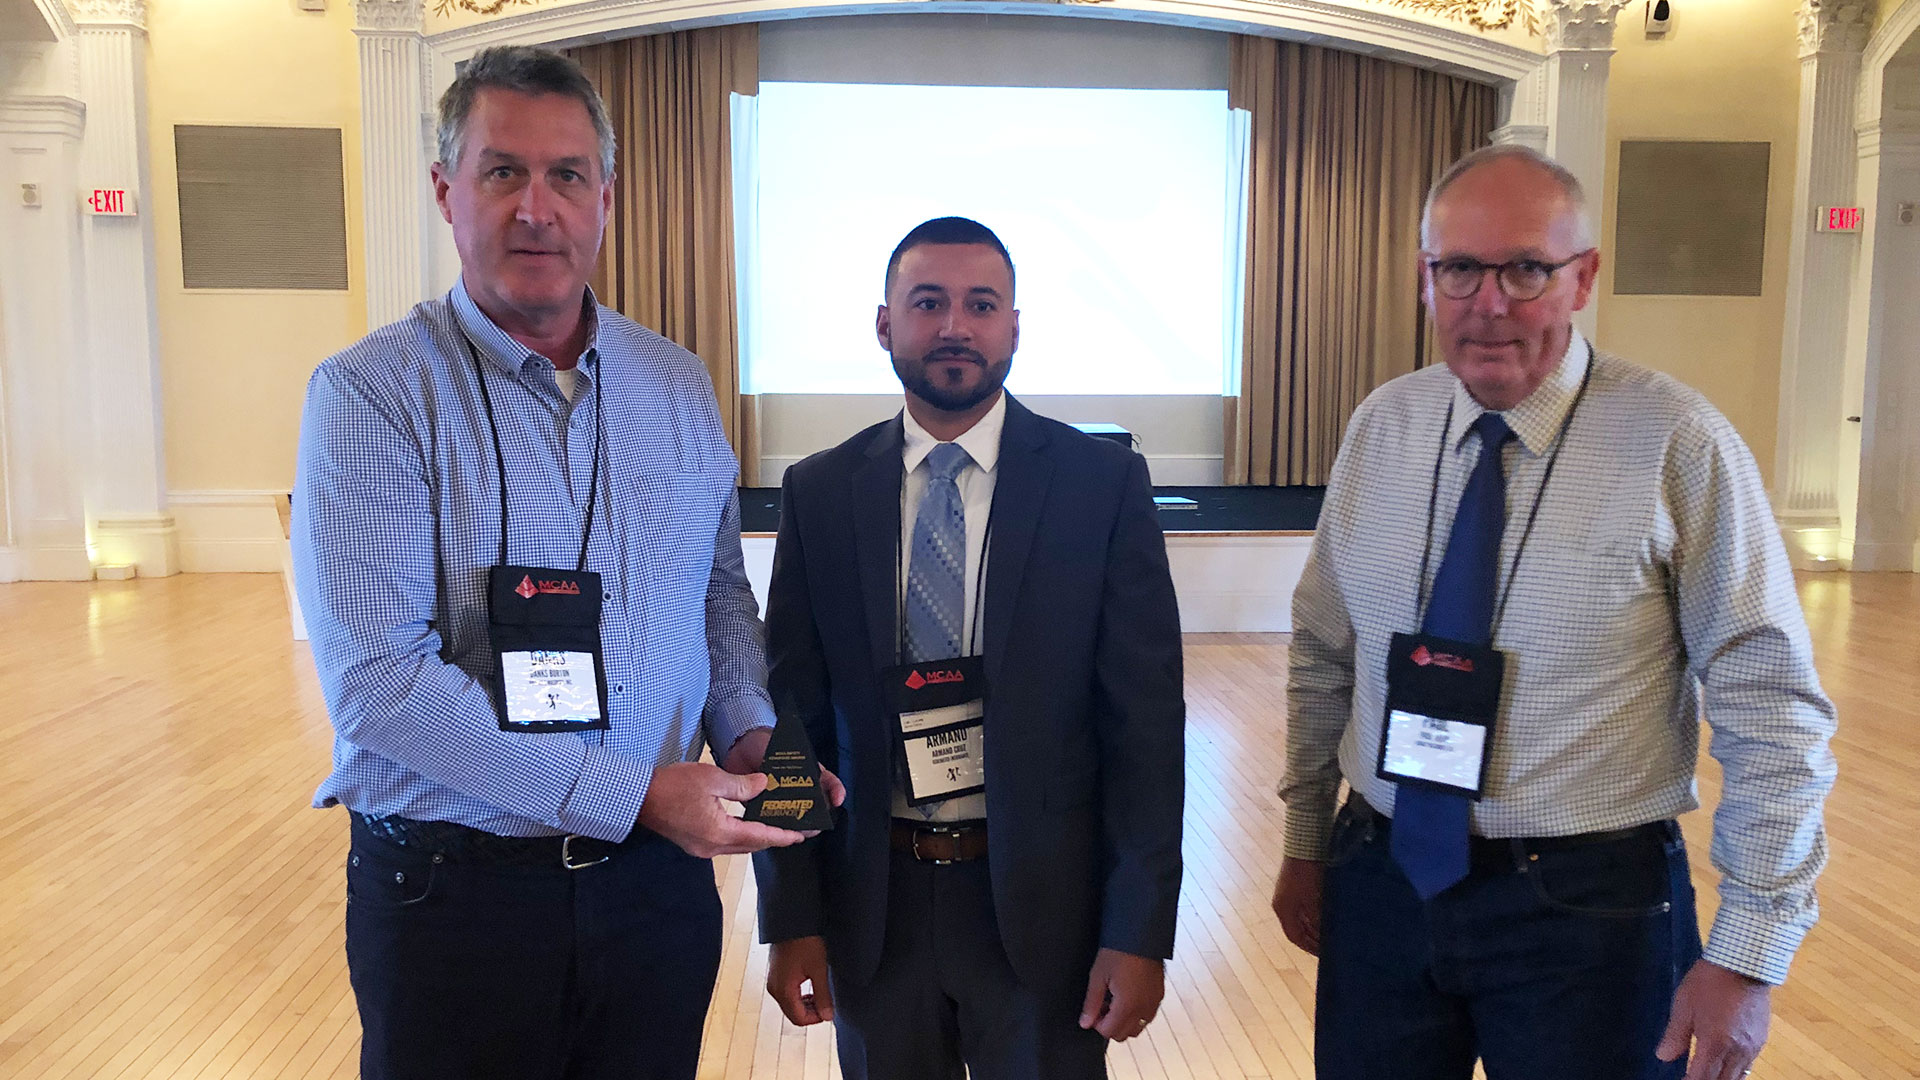 Danks Burton (left) is presented the MCAA Safety Advantage Award by Armand Cruz of Federated Insurance (center) with Paul Odom (right).